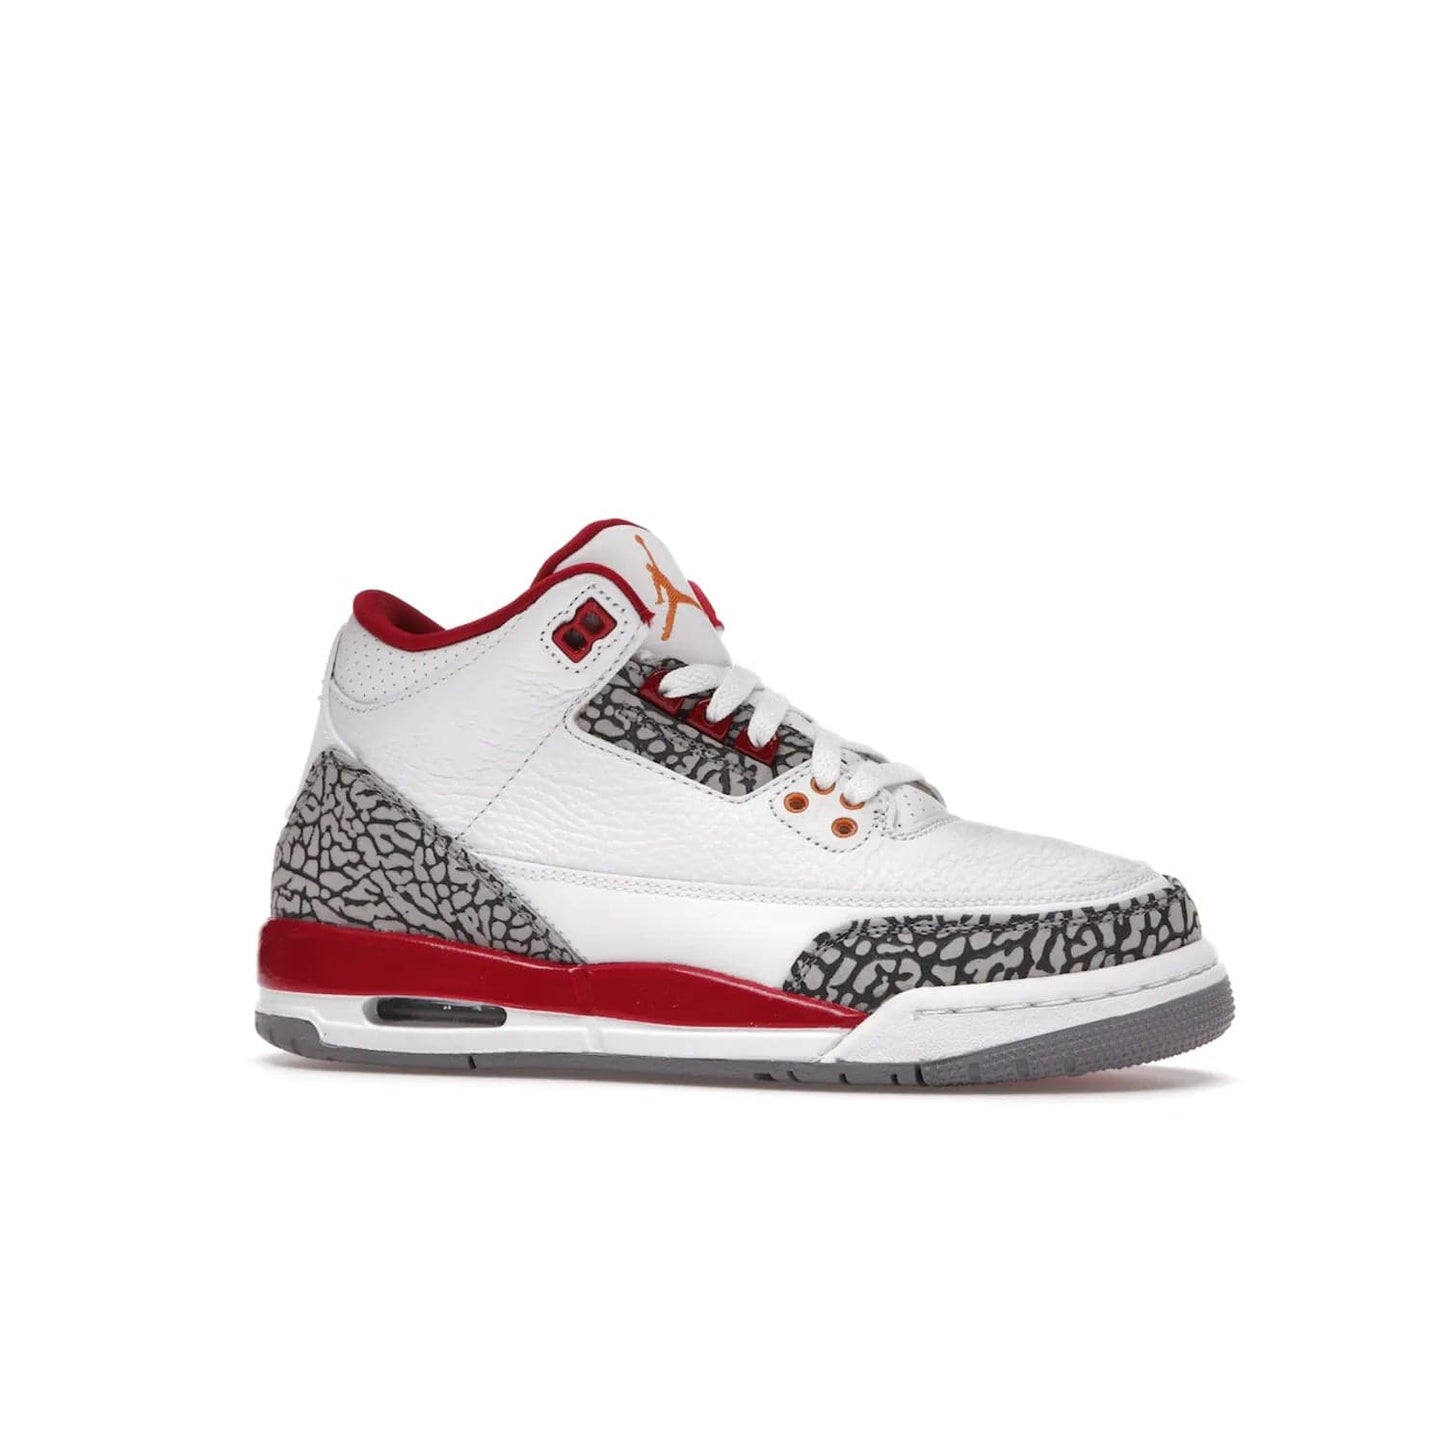 Jordan 3 Retro Cardinal (GS) - Image 3 - Only at www.BallersClubKickz.com - Shop the kid-sized Air Jordan 3 Retro Cardinal GS, released Feb 2022. White tumbled leather upper, light curry accenting, cement grey and classic red details throughout. Visible Air cushioning, midsole, and an eye-catching outsole. Show off your style with this fashionable streetwear silhouette.